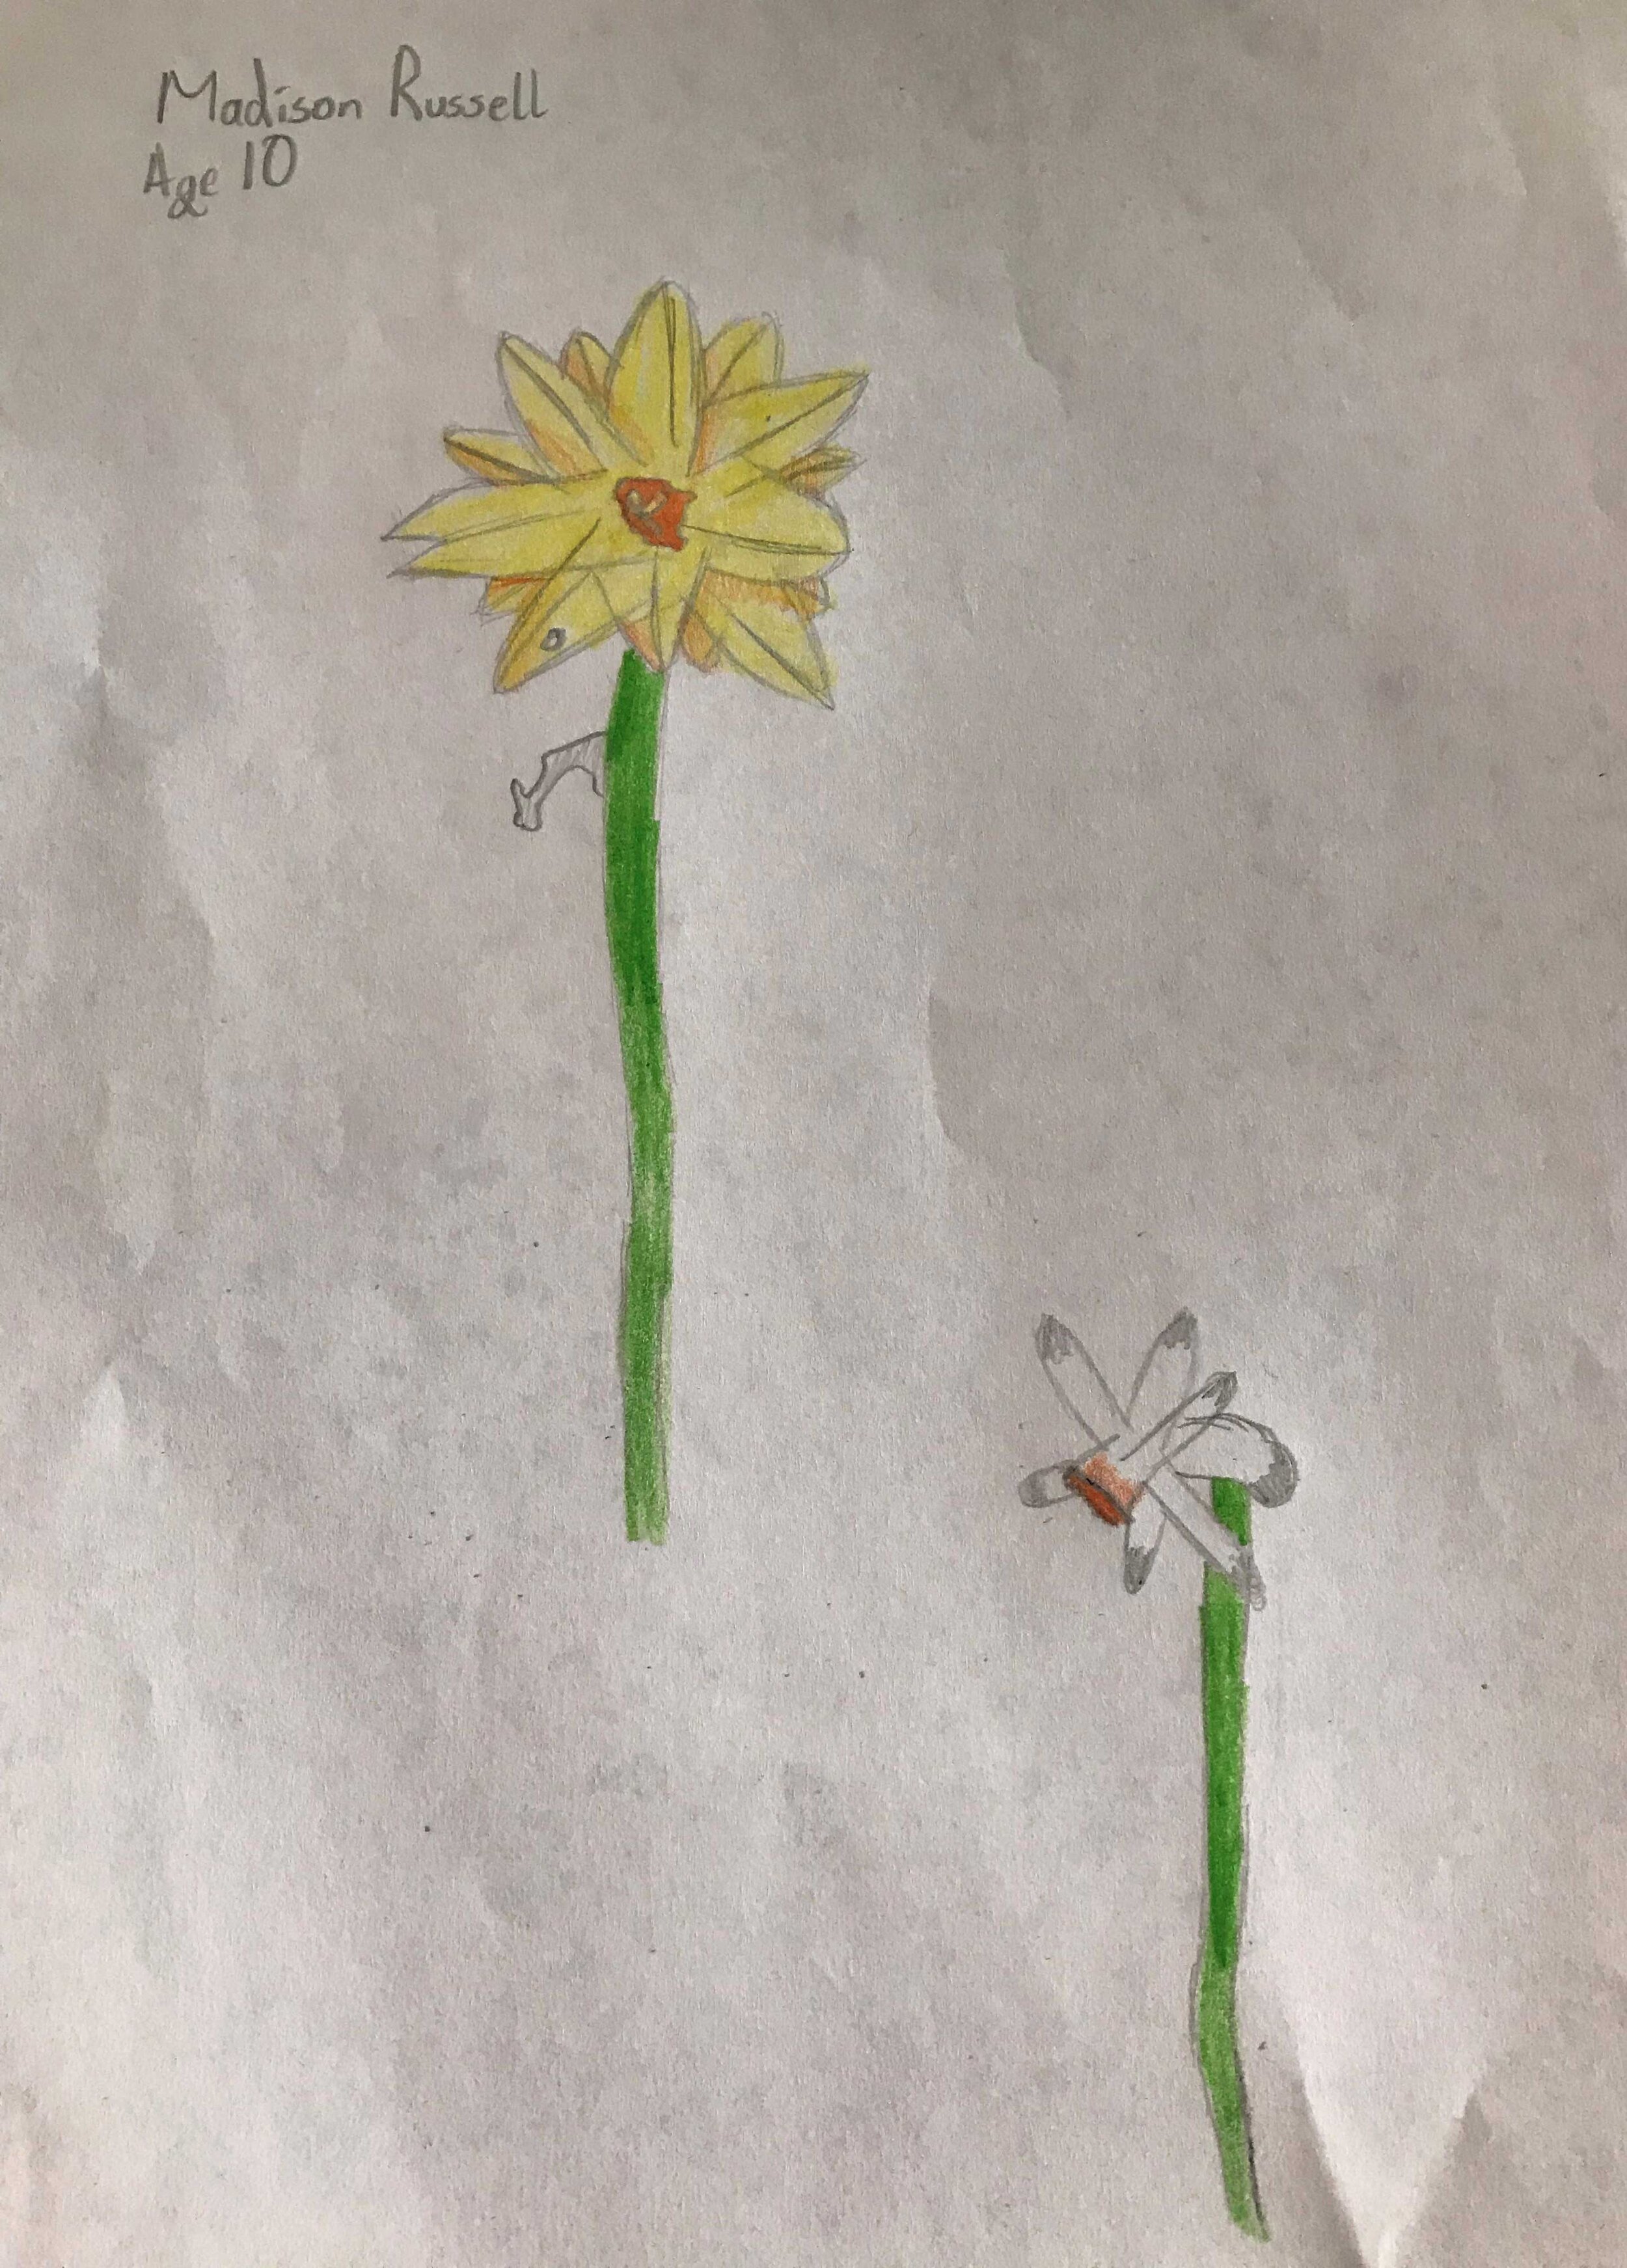 Daffodils by Madison Russell age 10